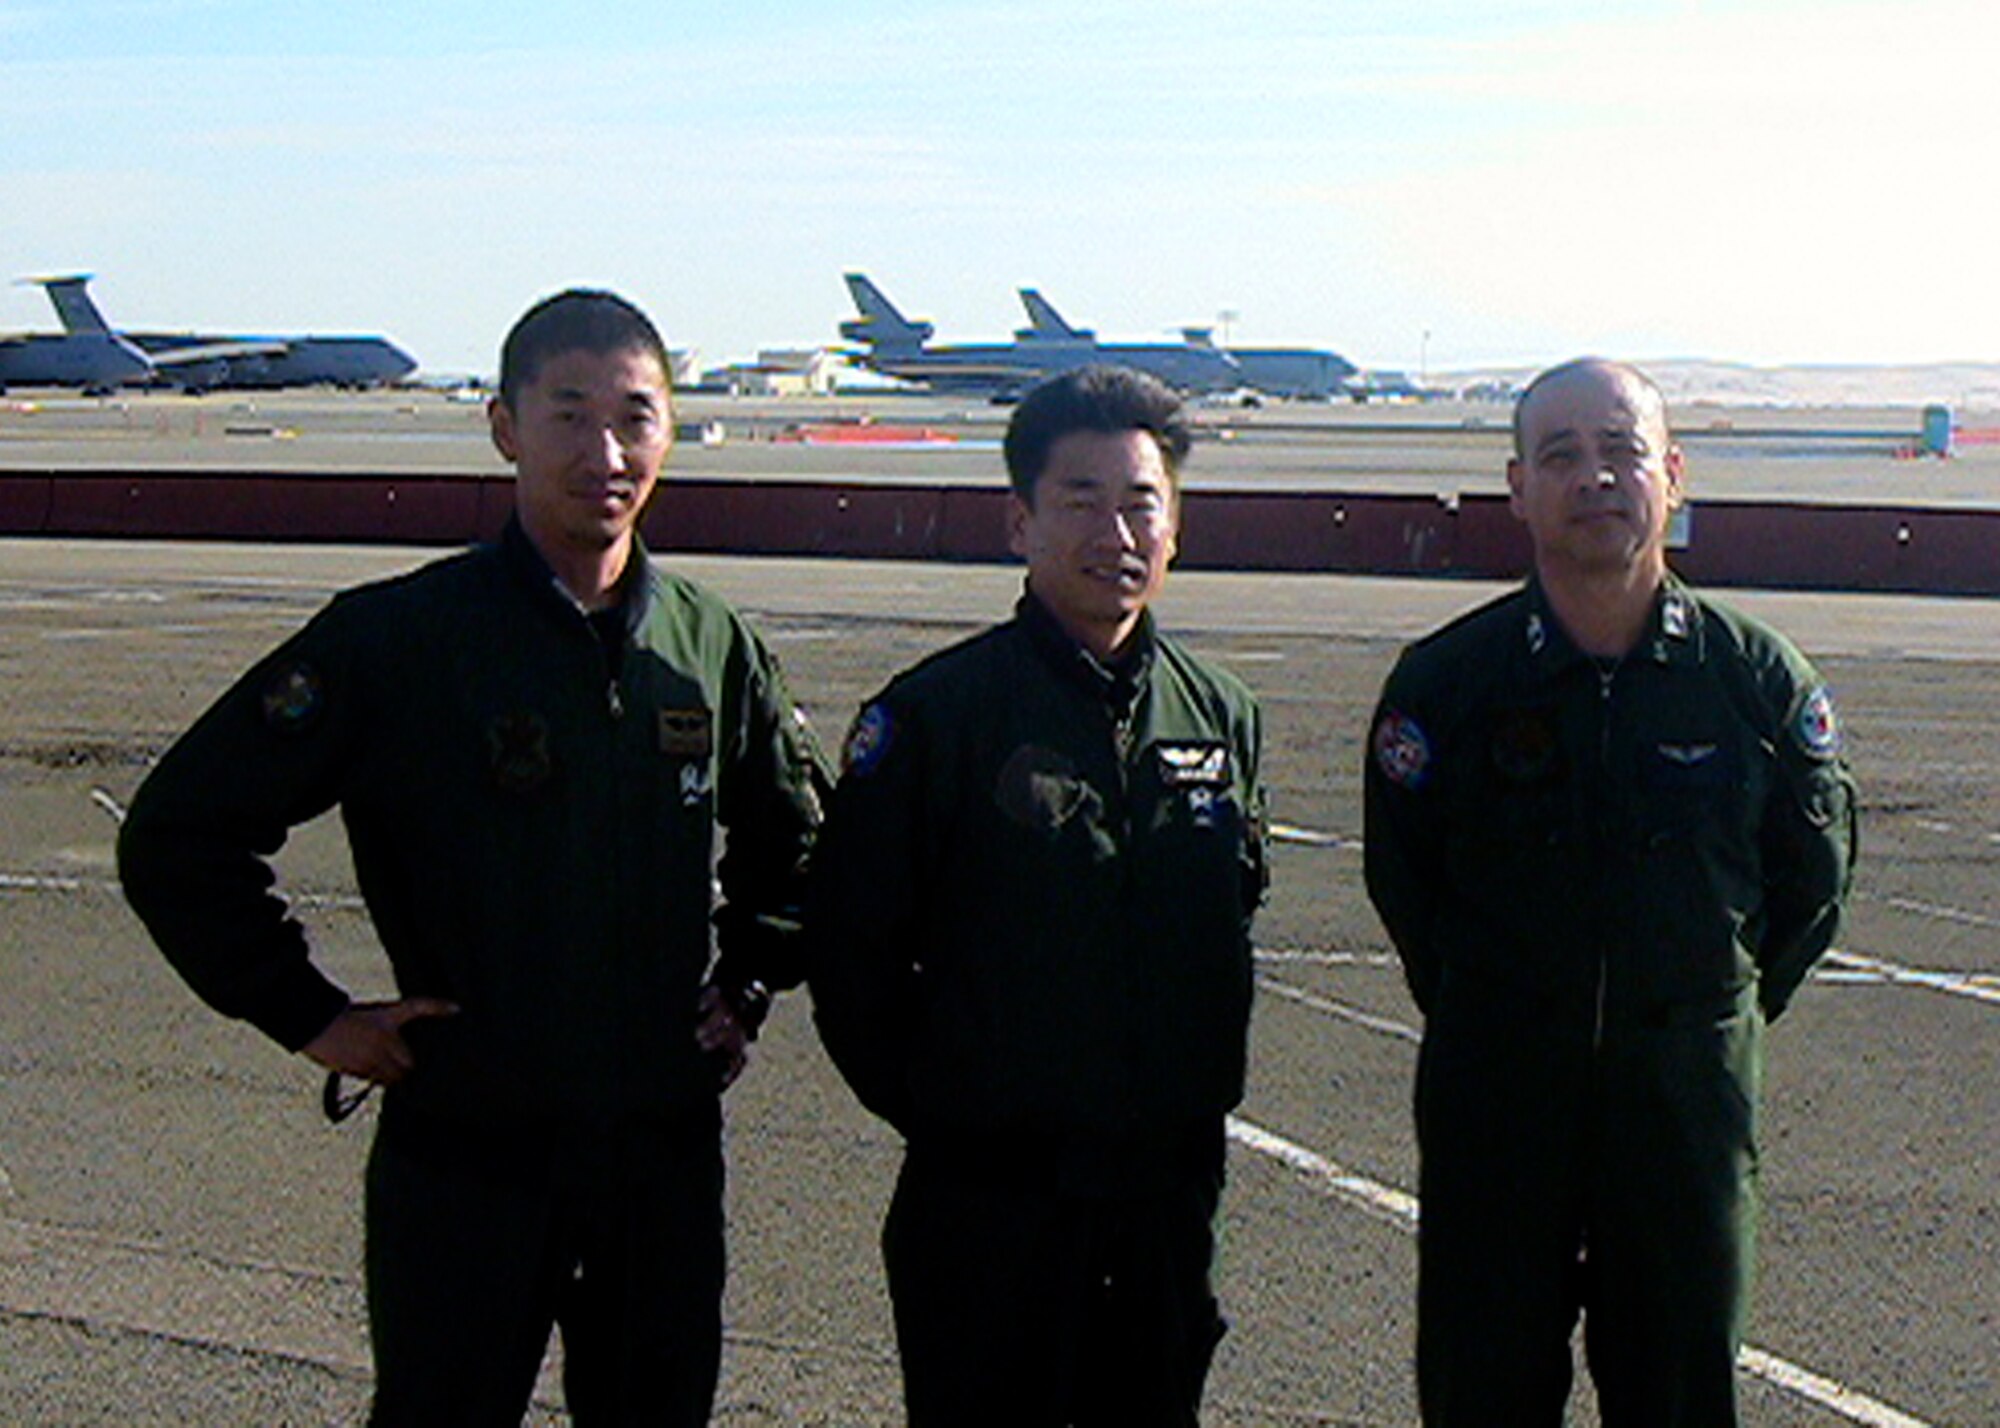 From left to right: Tech. Sgt. Masaaki Takahashi, Master Sgt. Etsuro Mizokami and Master Sgt. Randy Kawasaki, Japan Air Self Defense Force, were selected to be their country's first boom operators. (U.S. Air Force photo)